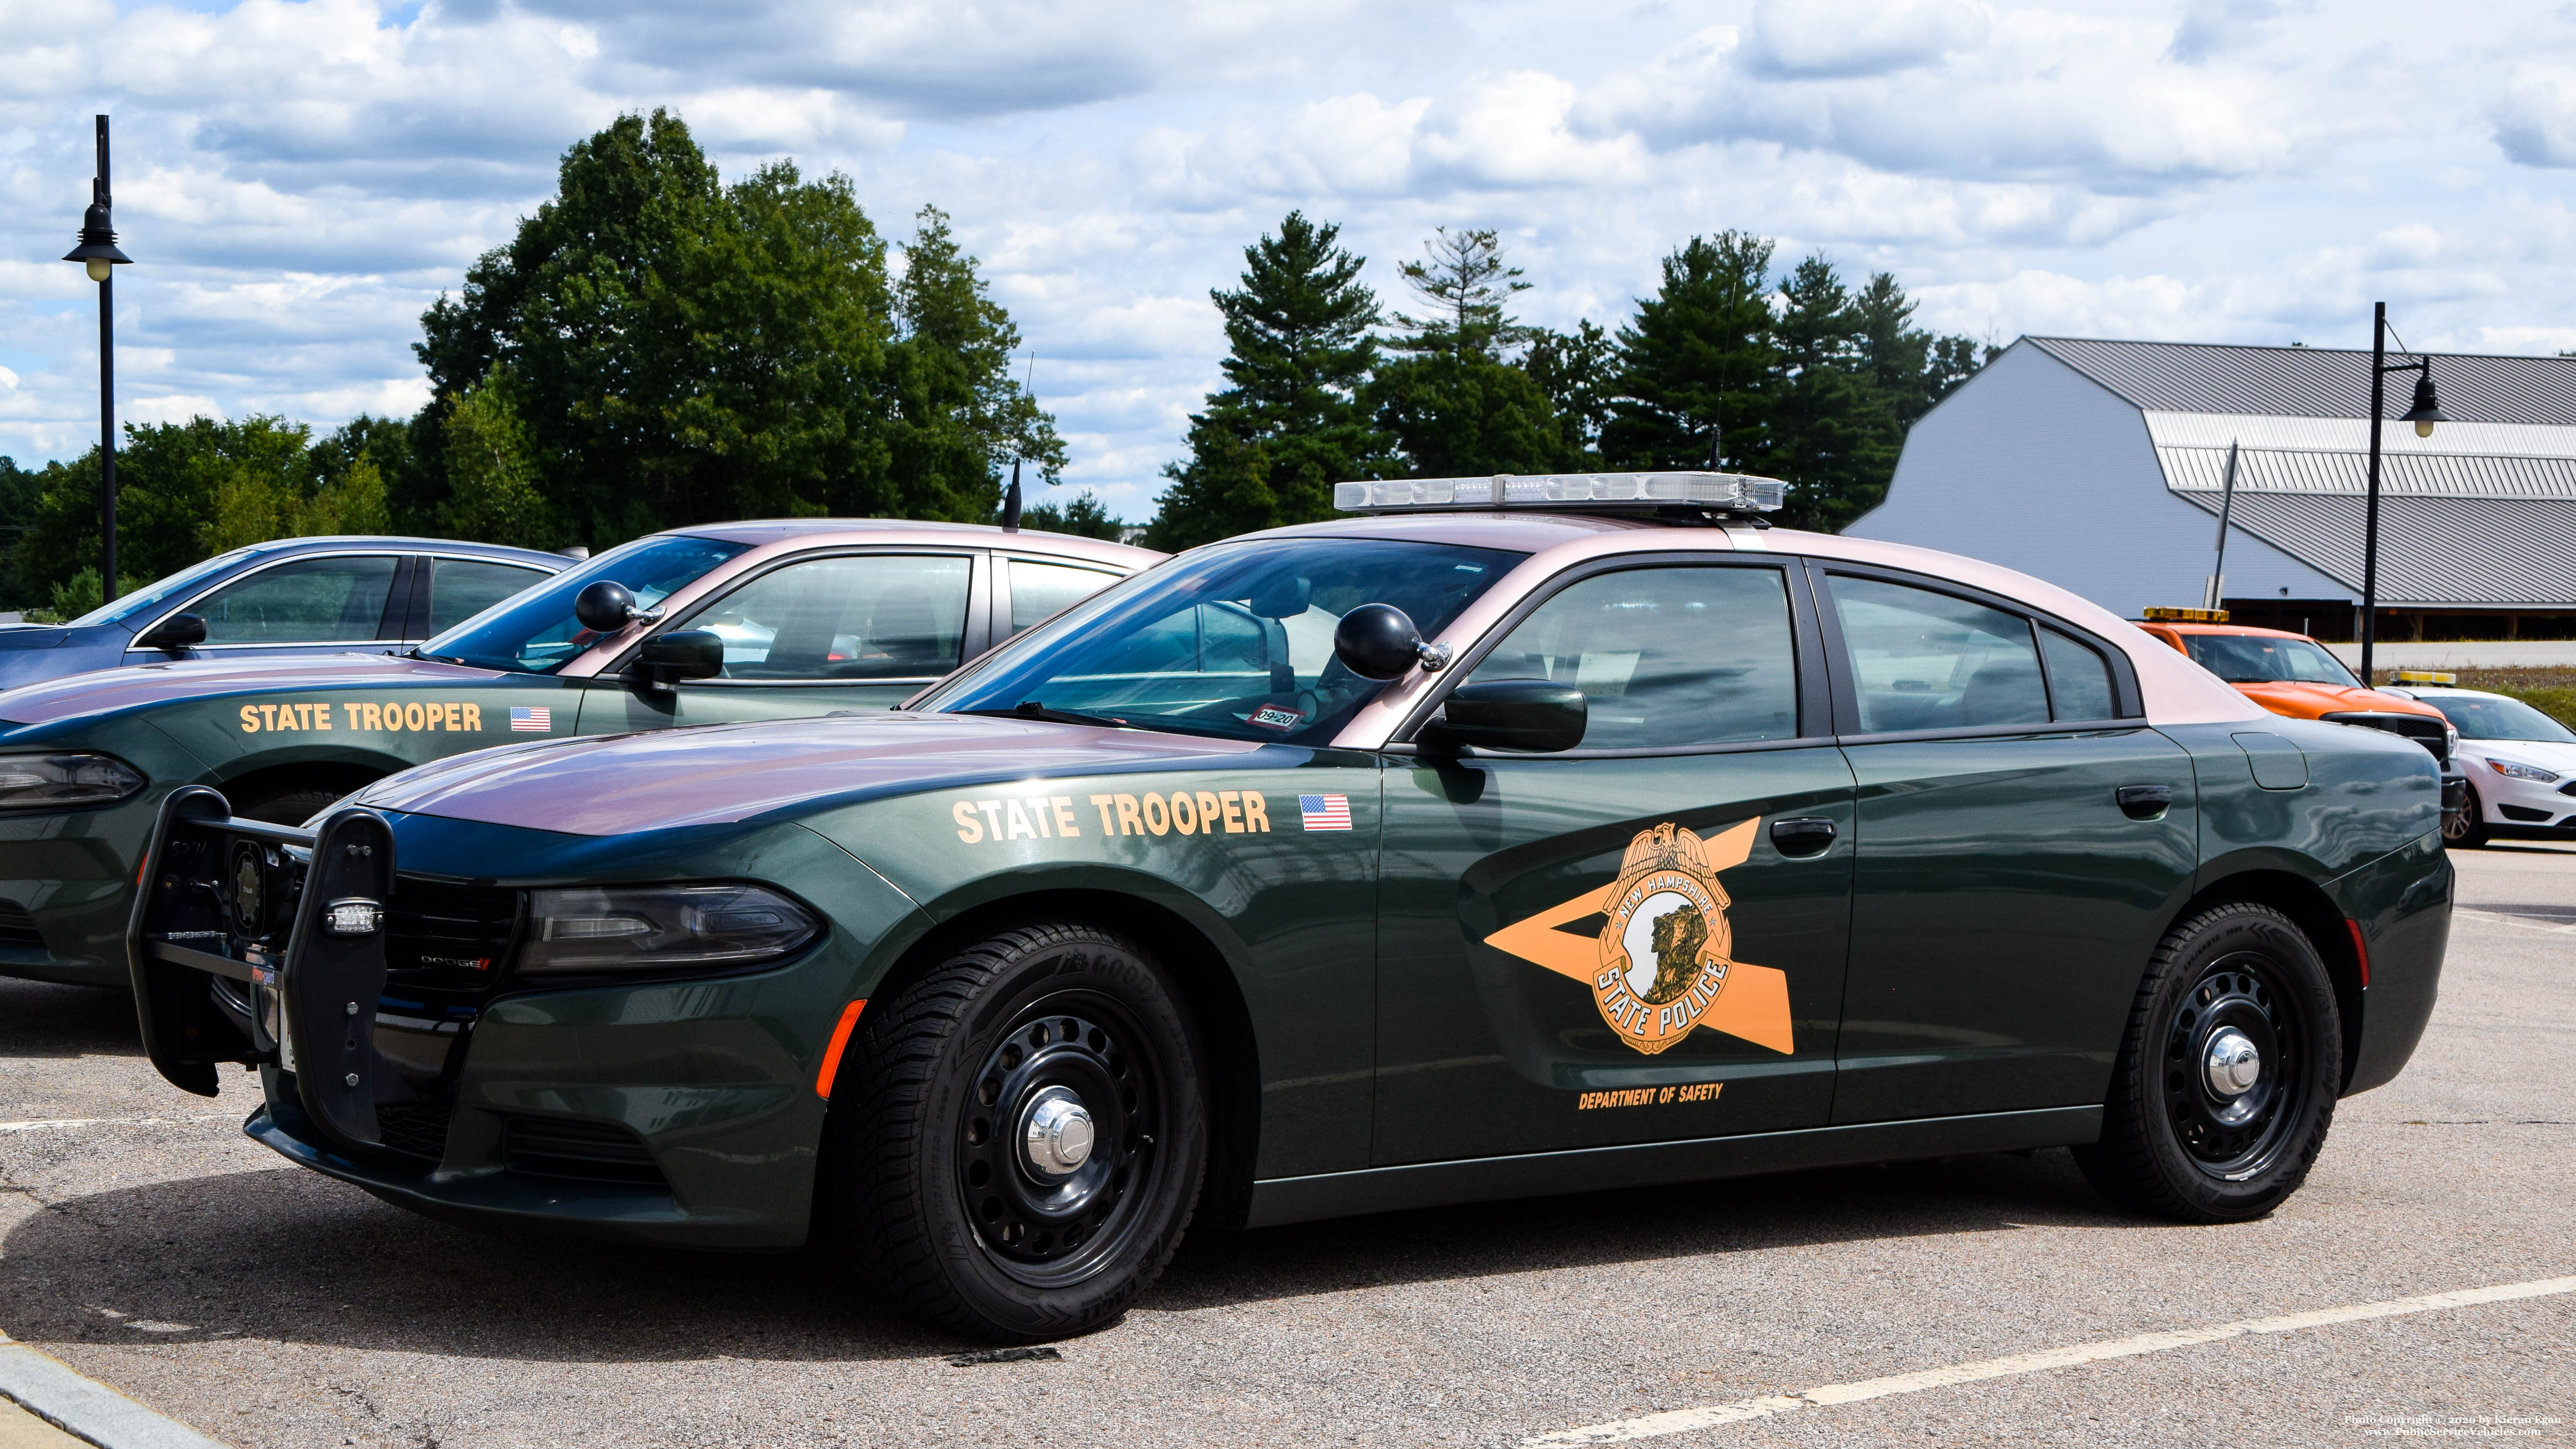 A photo  of New Hampshire State Police
            Cruiser 207, a 2015-2019 Dodge Charger             taken by Kieran Egan